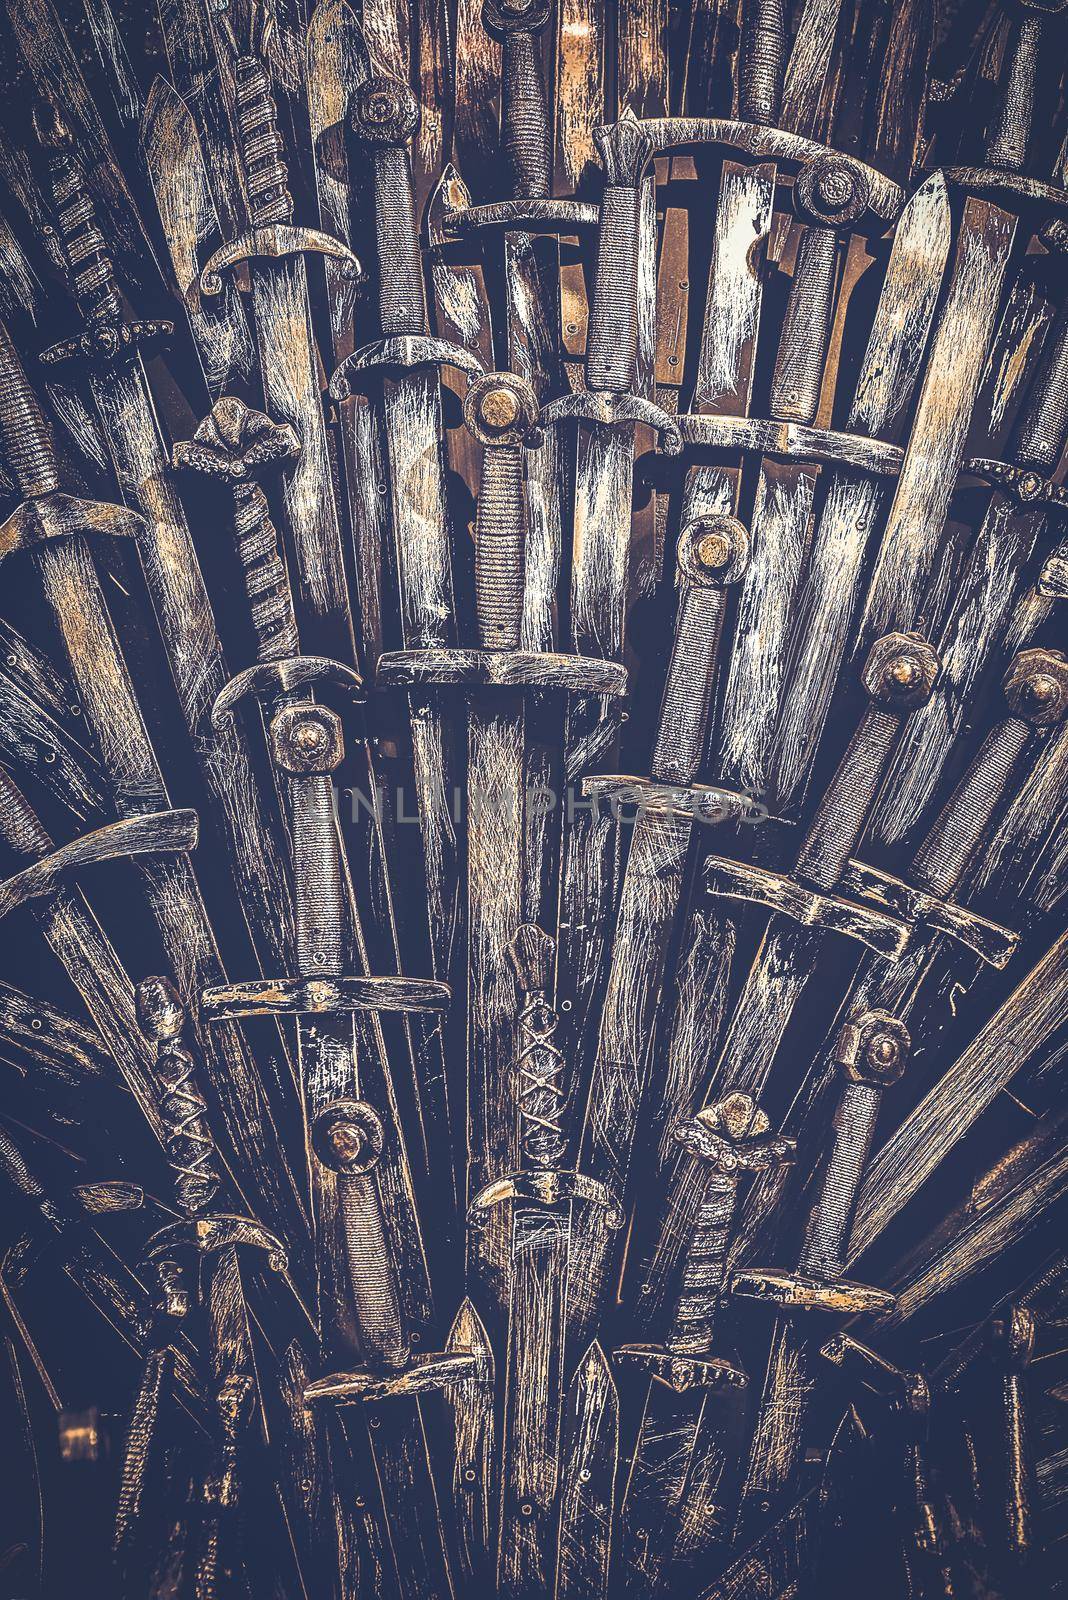 Metal knight swords background. Close up